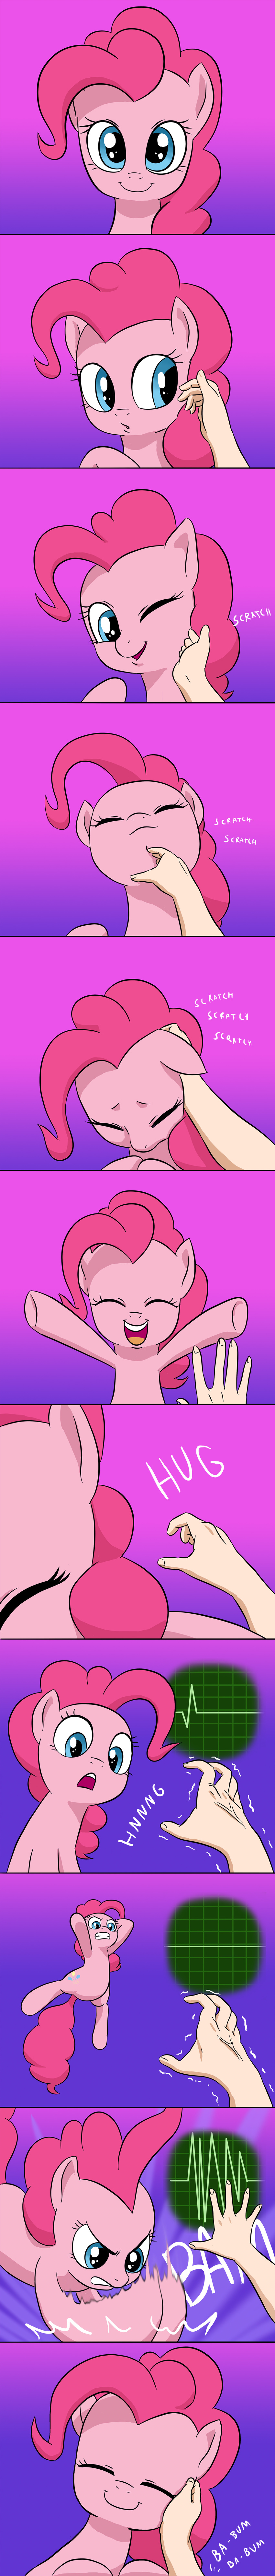 blue_eyes comic cpr doublewbrothers equine female first_person_view friendship_is_magic hair hand heart_attack horse hug human mammal my_little_pony pink_hair pinkie_pie_(mlp) pony scratch scratches